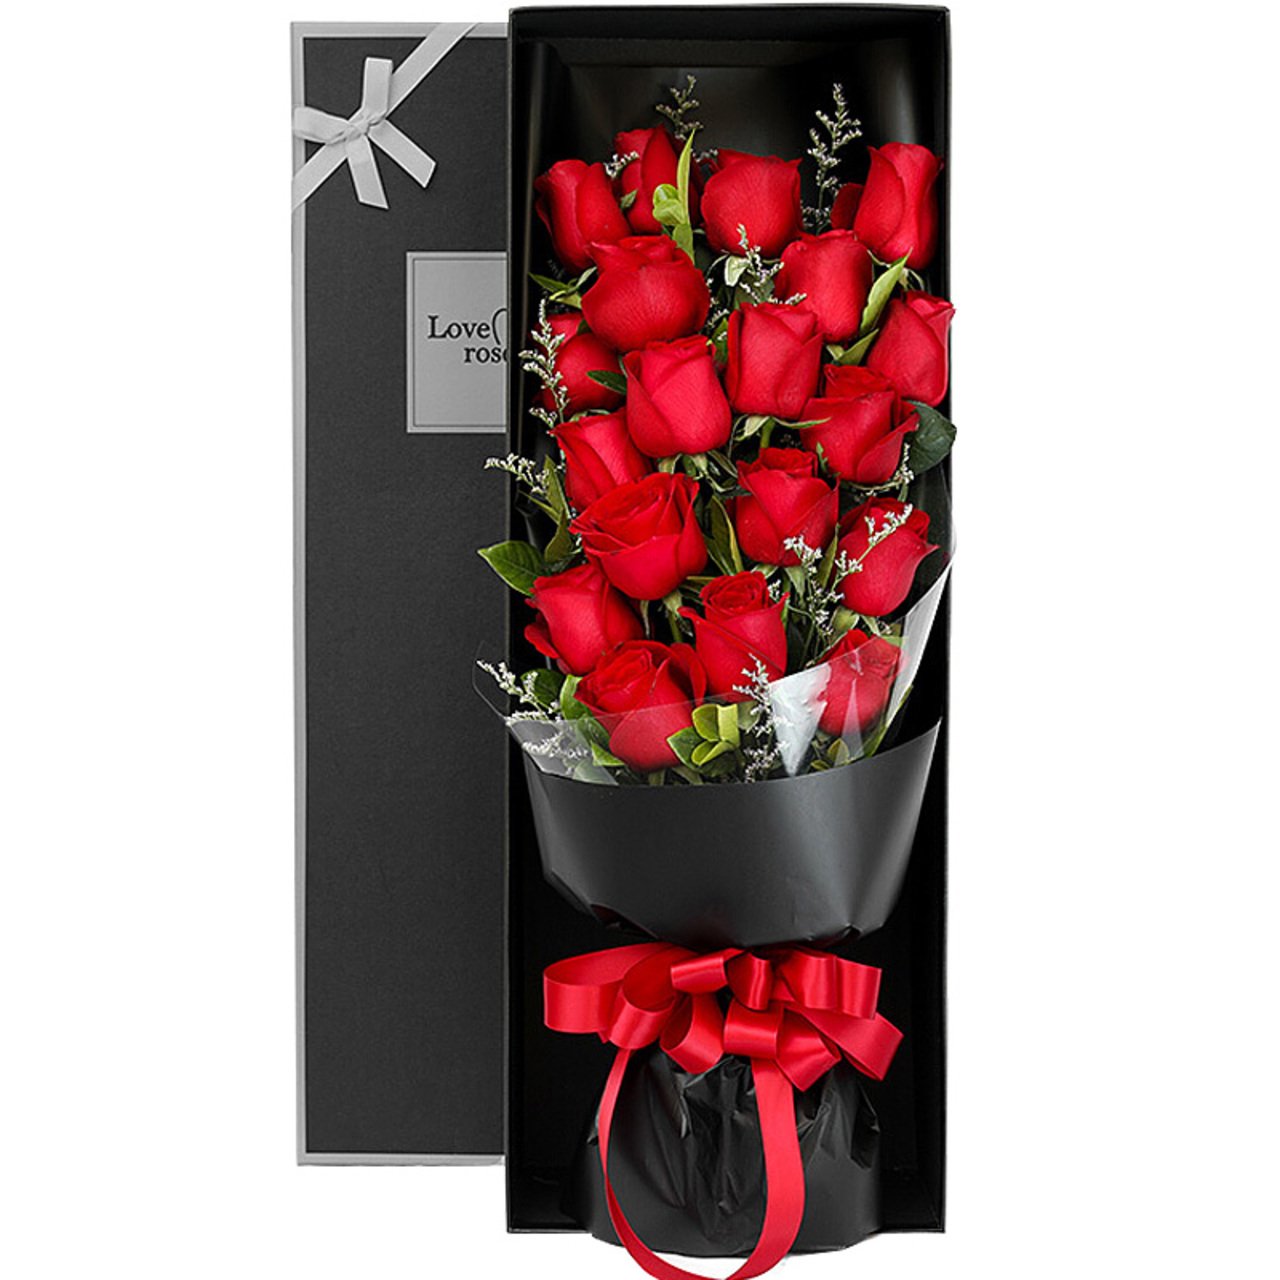 Love miss(
21 red roses)